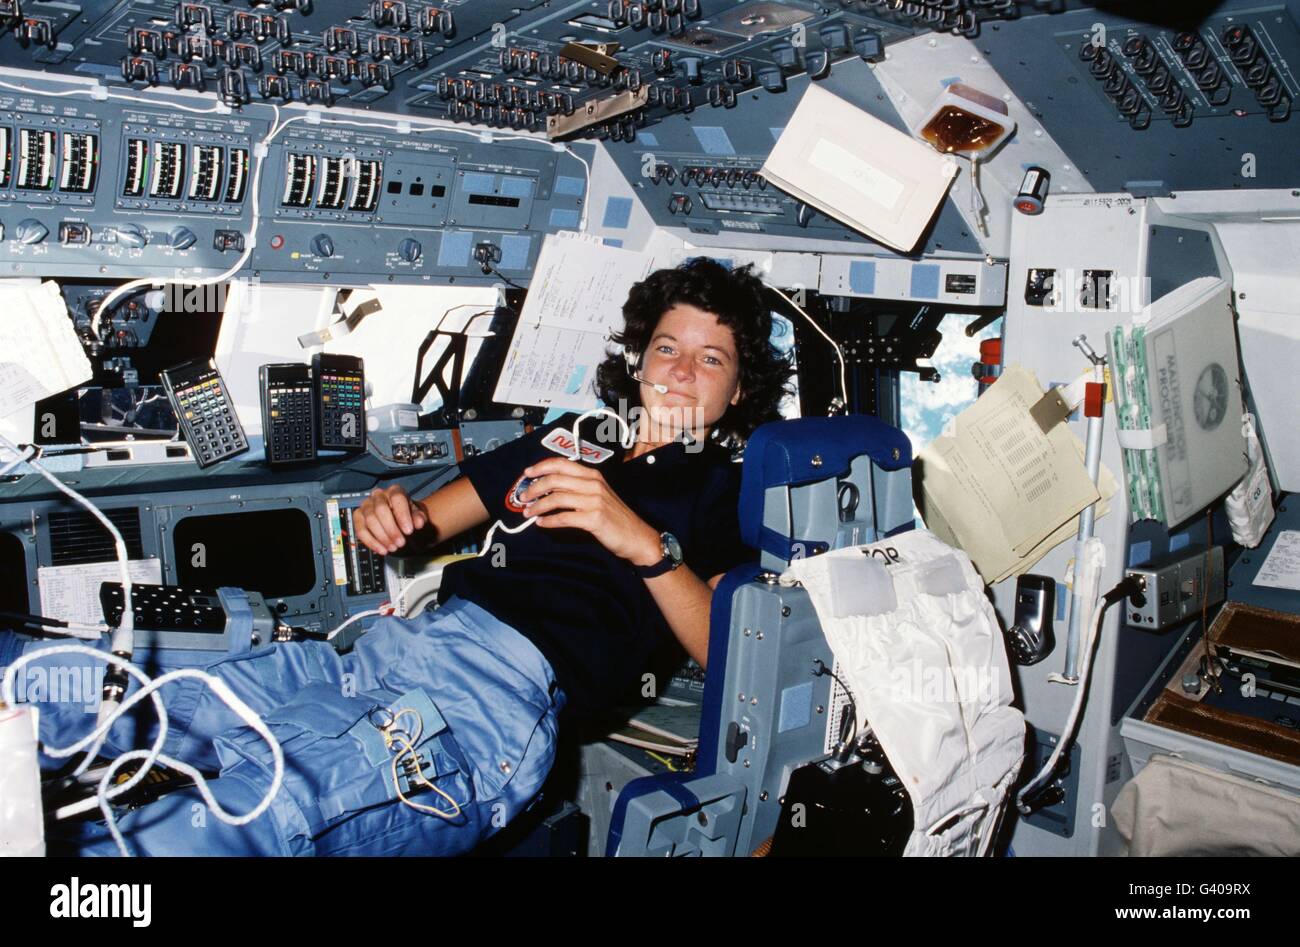 American astronaut Sally Ride floats in microgravity in the flight deck during Space Shuttle Challenger STS-7 mission June 18, 1983 in Earth Orbit. Ride became the first American woman to fly in space during the mission. Stock Photo